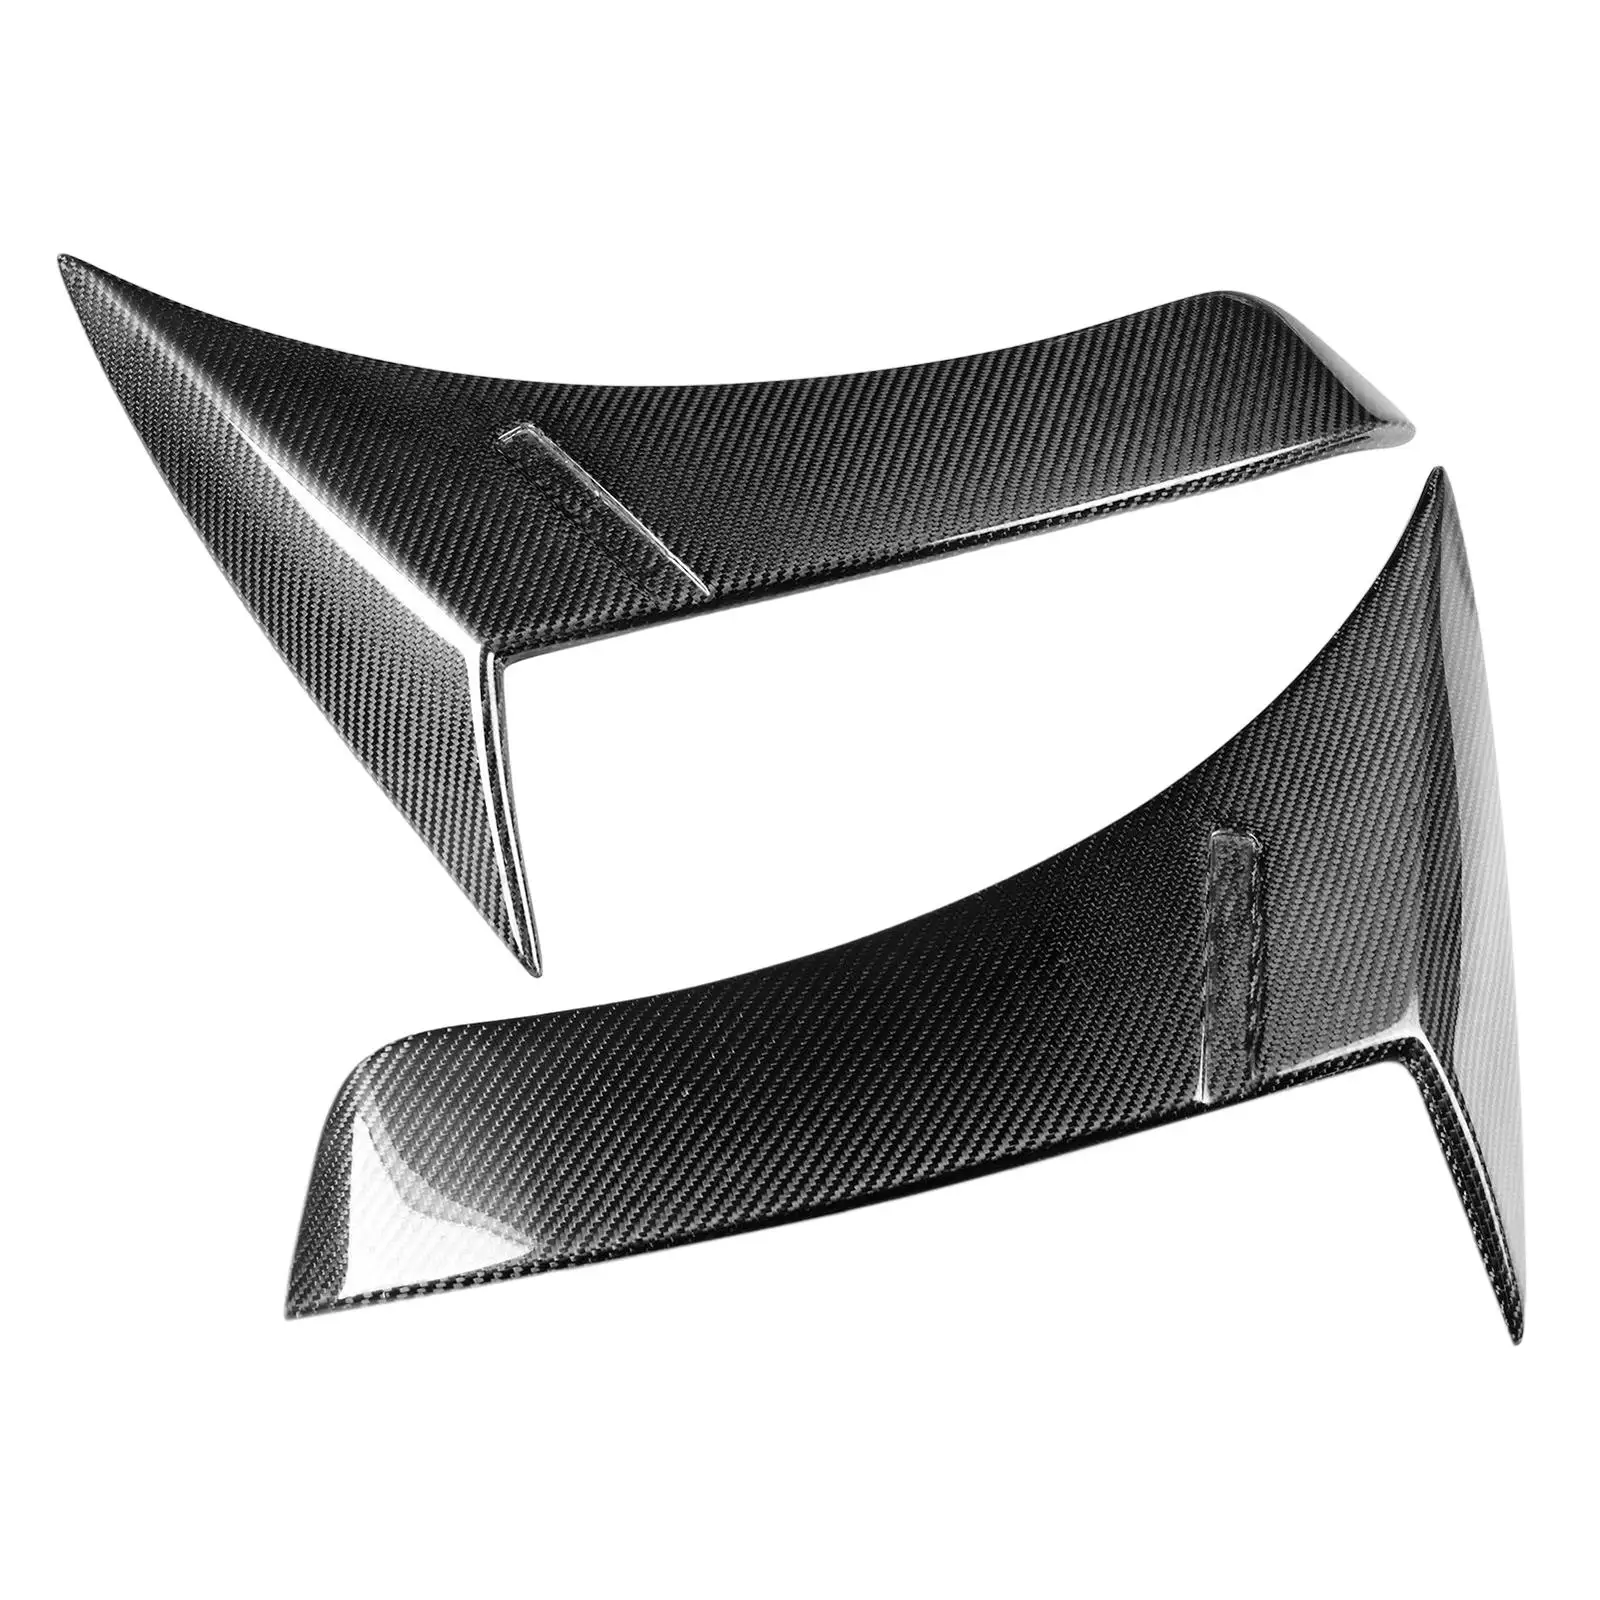 Car Fender Side Vents Durable Replaces Automotive Fender for Mercedes-benz S Class W222 2014 to 2019 No Need Drilling Holes